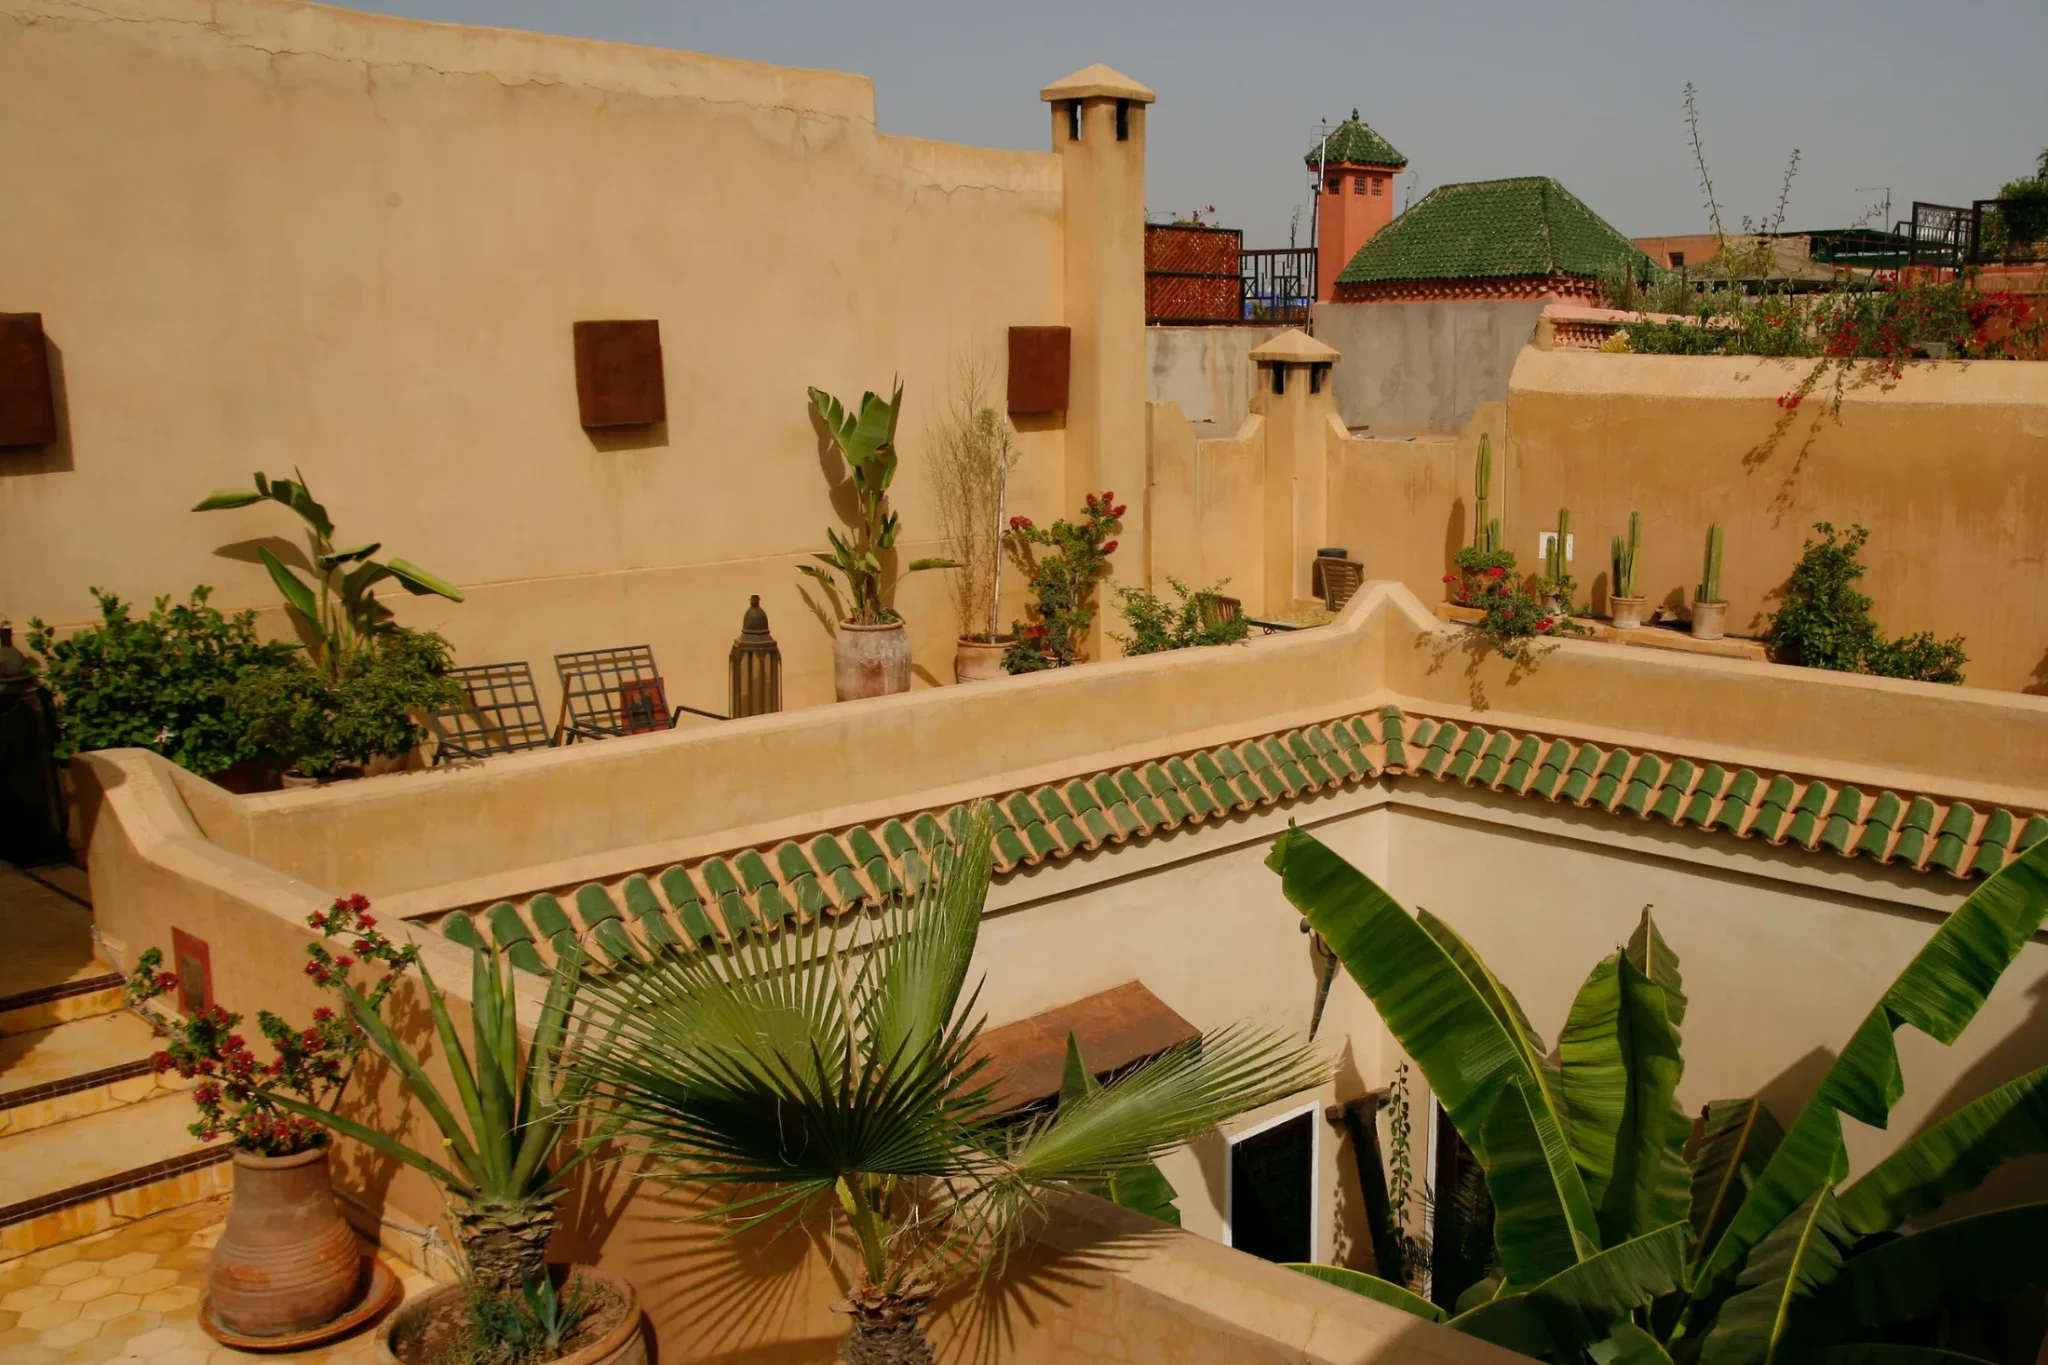 A Traditional Riad in Marrakech, Morocco